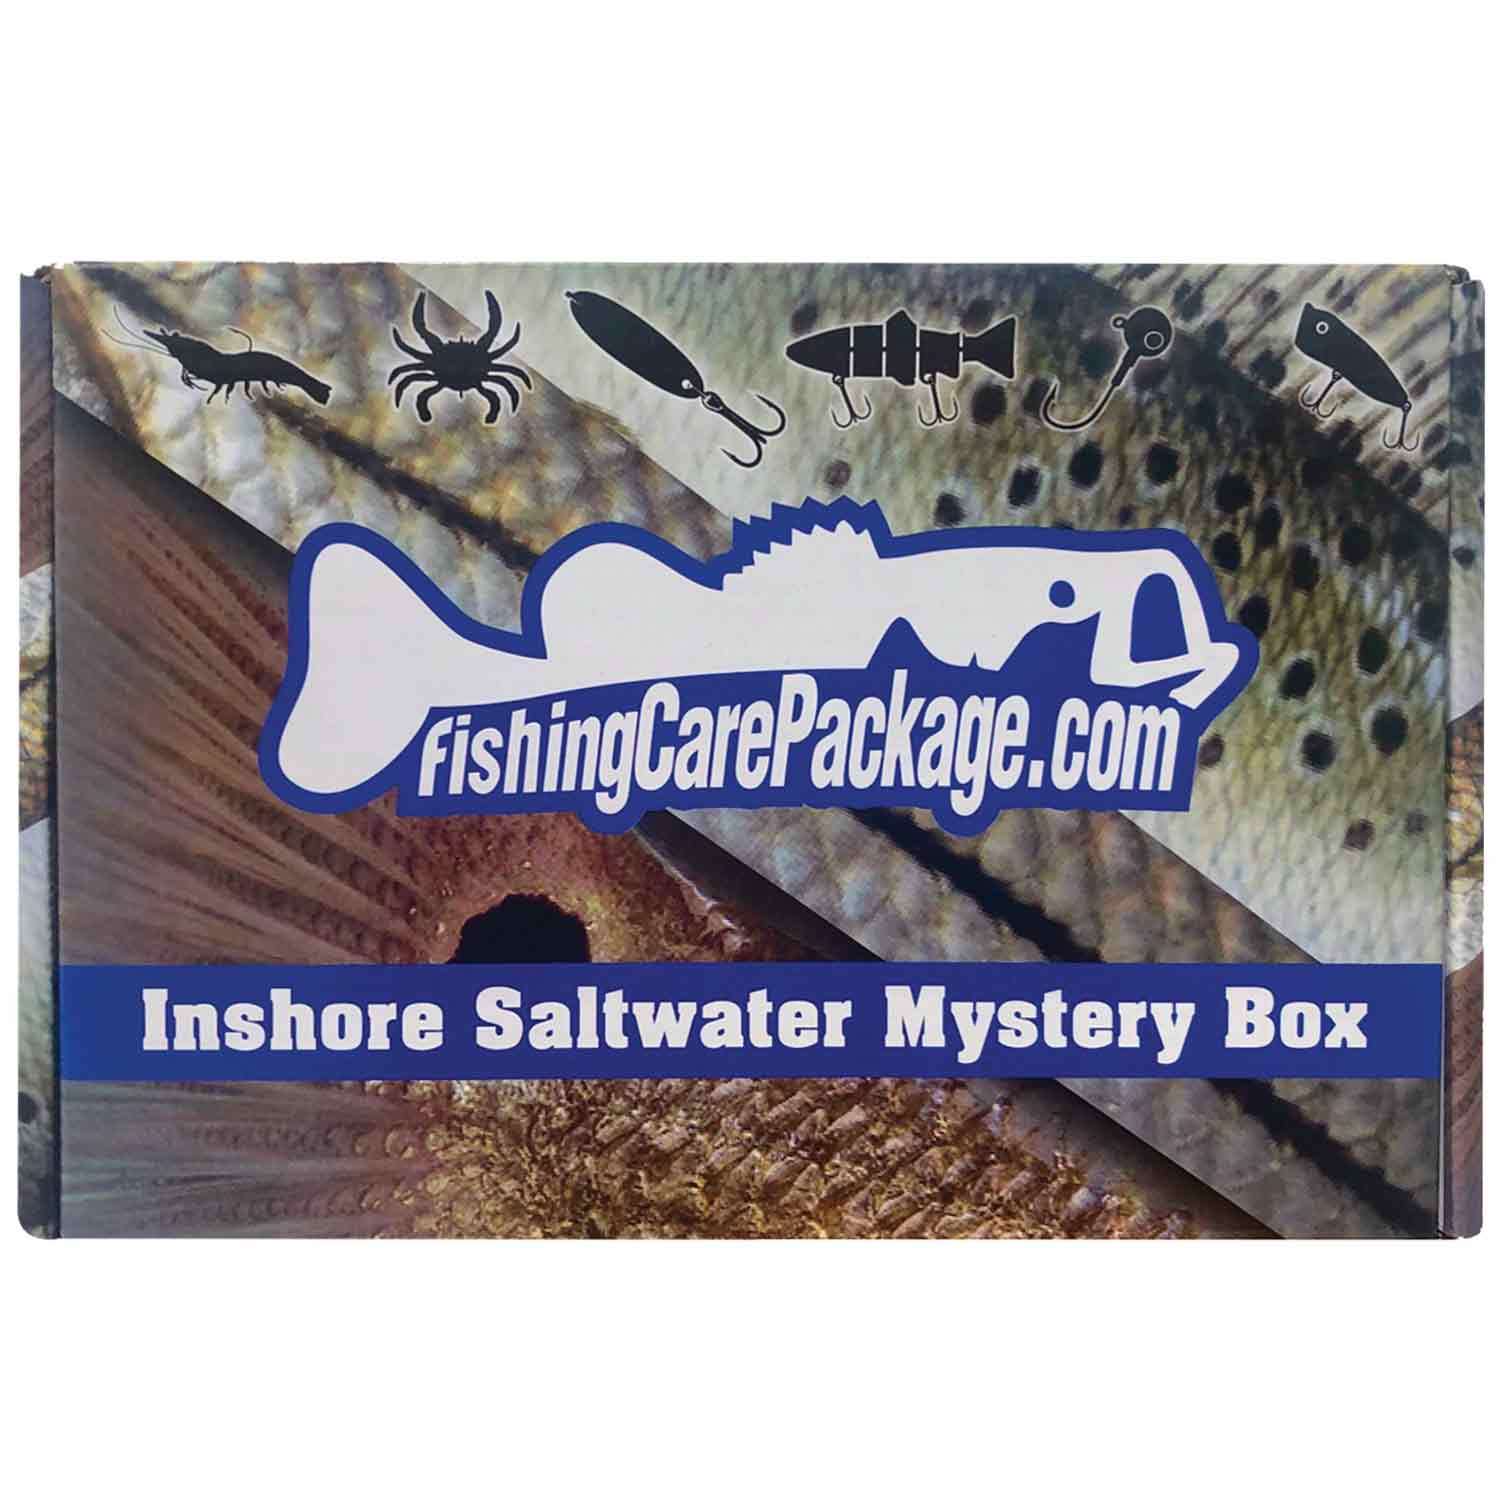 FISHING CARE PACKAGE Saltwater Inshore Mystery Box